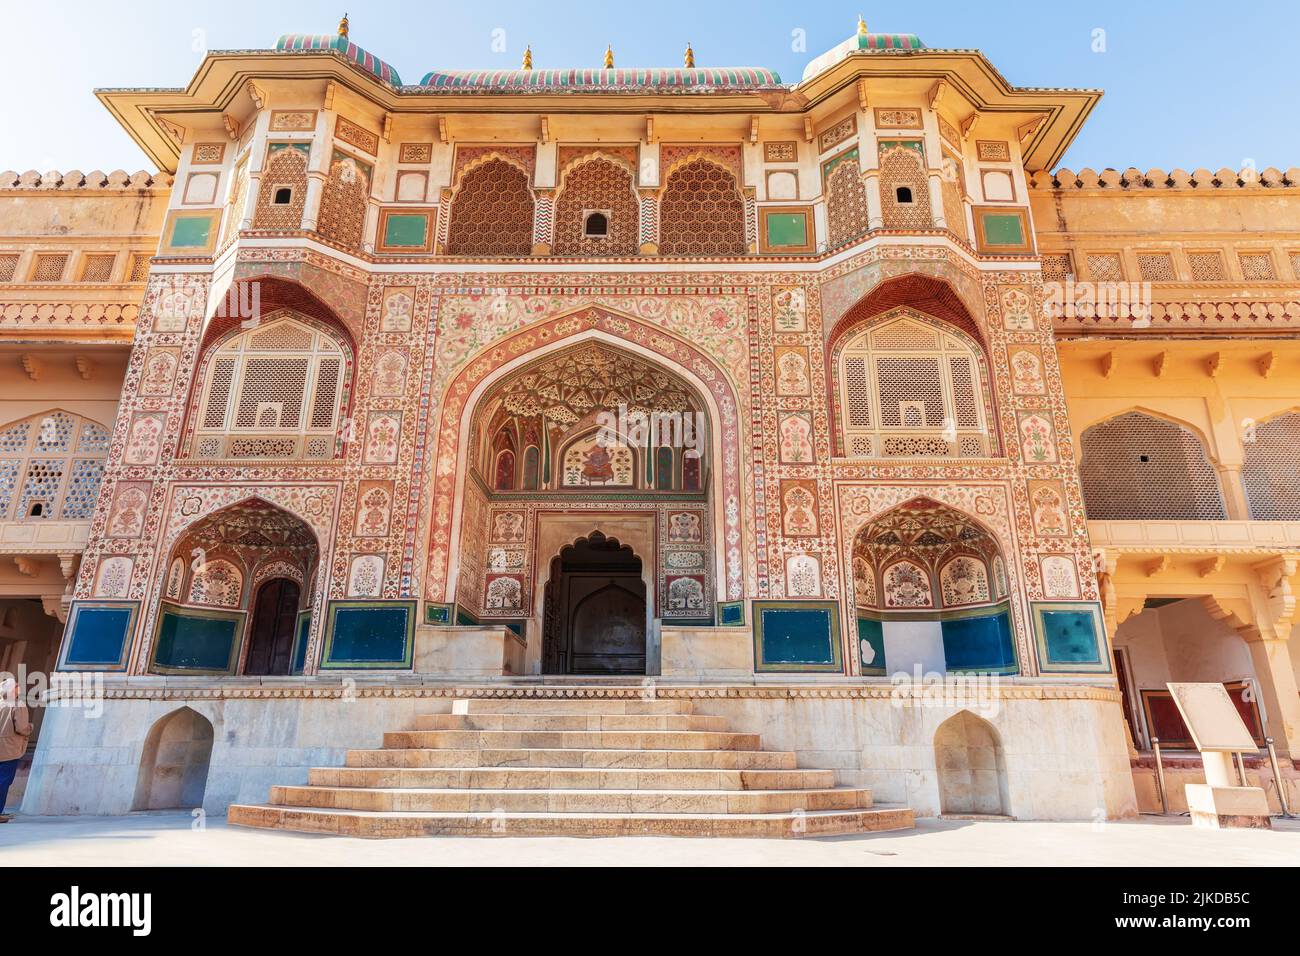 Ganesh Pol Gates in the Amber Fort of Jaipur, India. Stock Photo